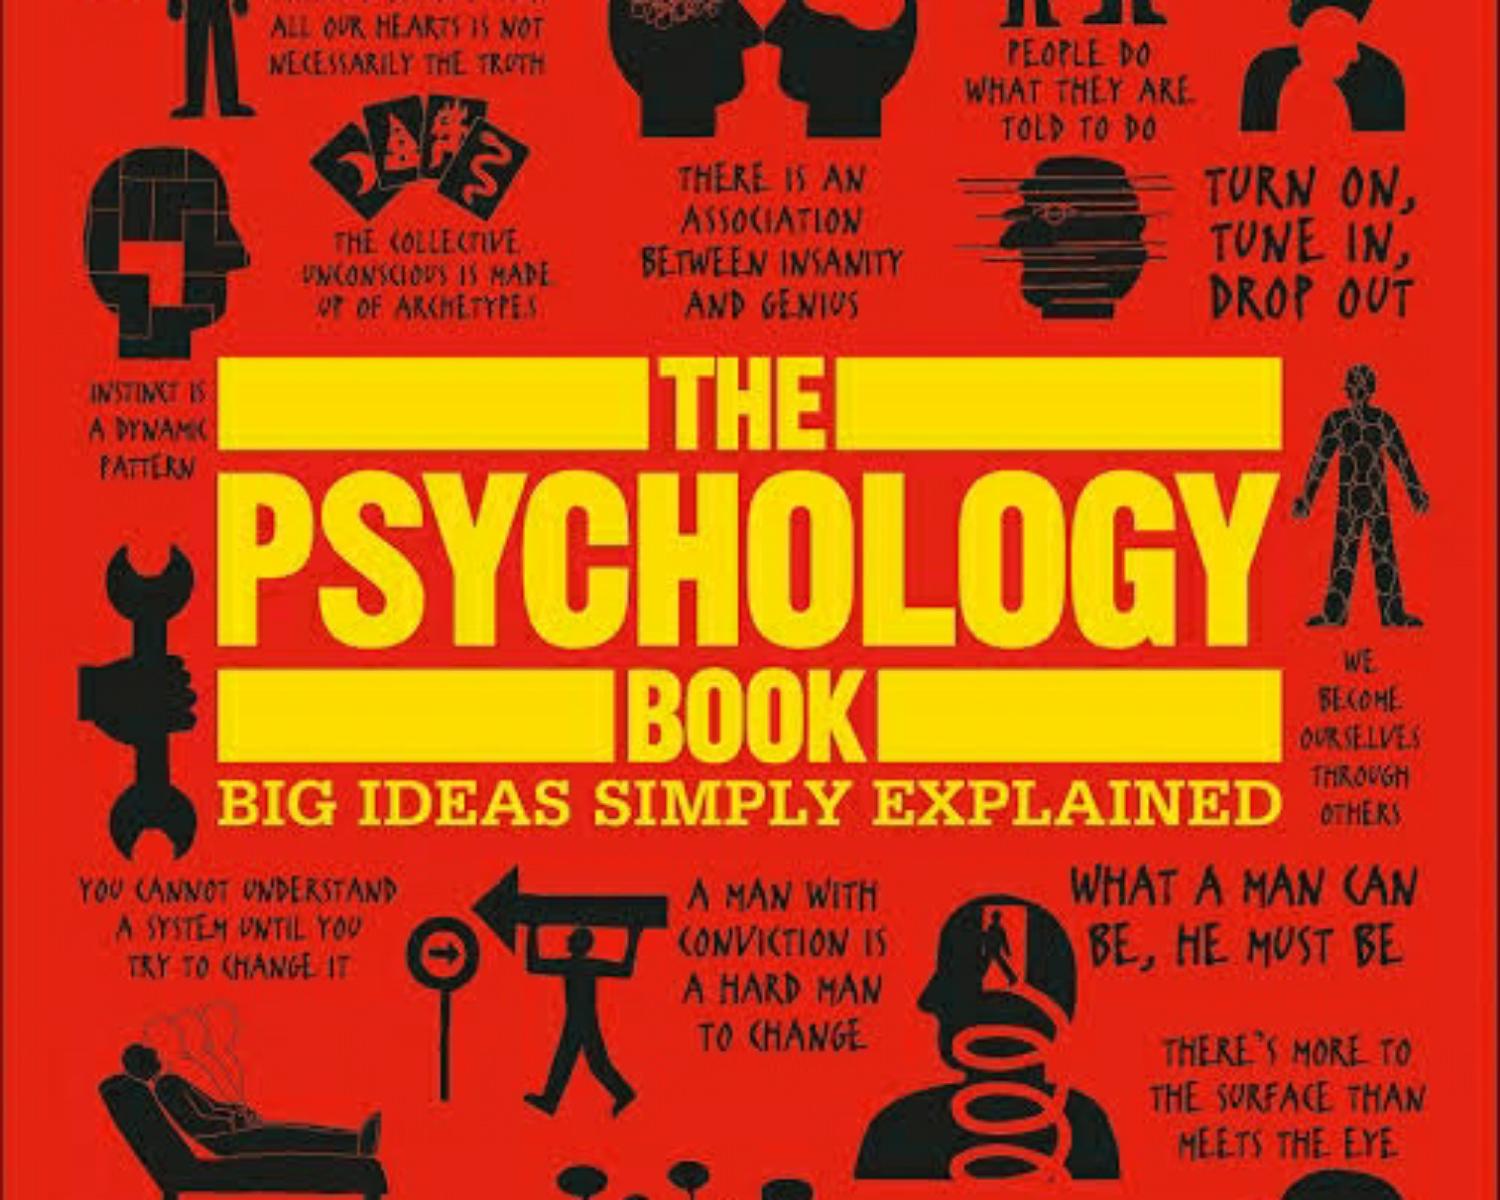 THE PSYCHOLOGY BOOK